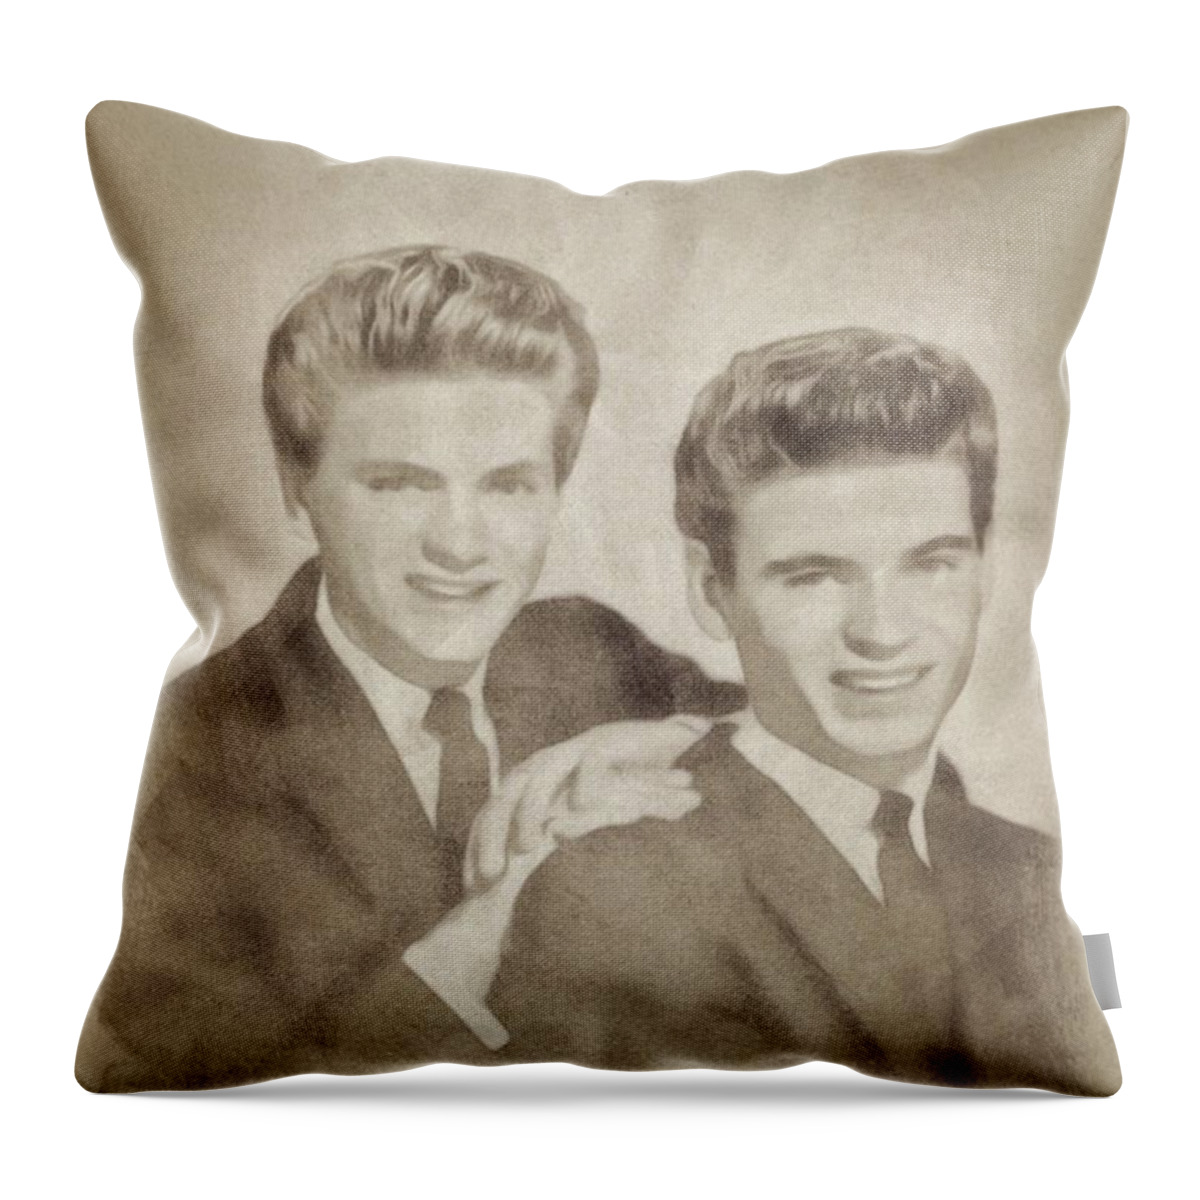 Hollywood Throw Pillow featuring the drawing The Everly Brothers, Music Legends by John Springfield by Esoterica Art Agency